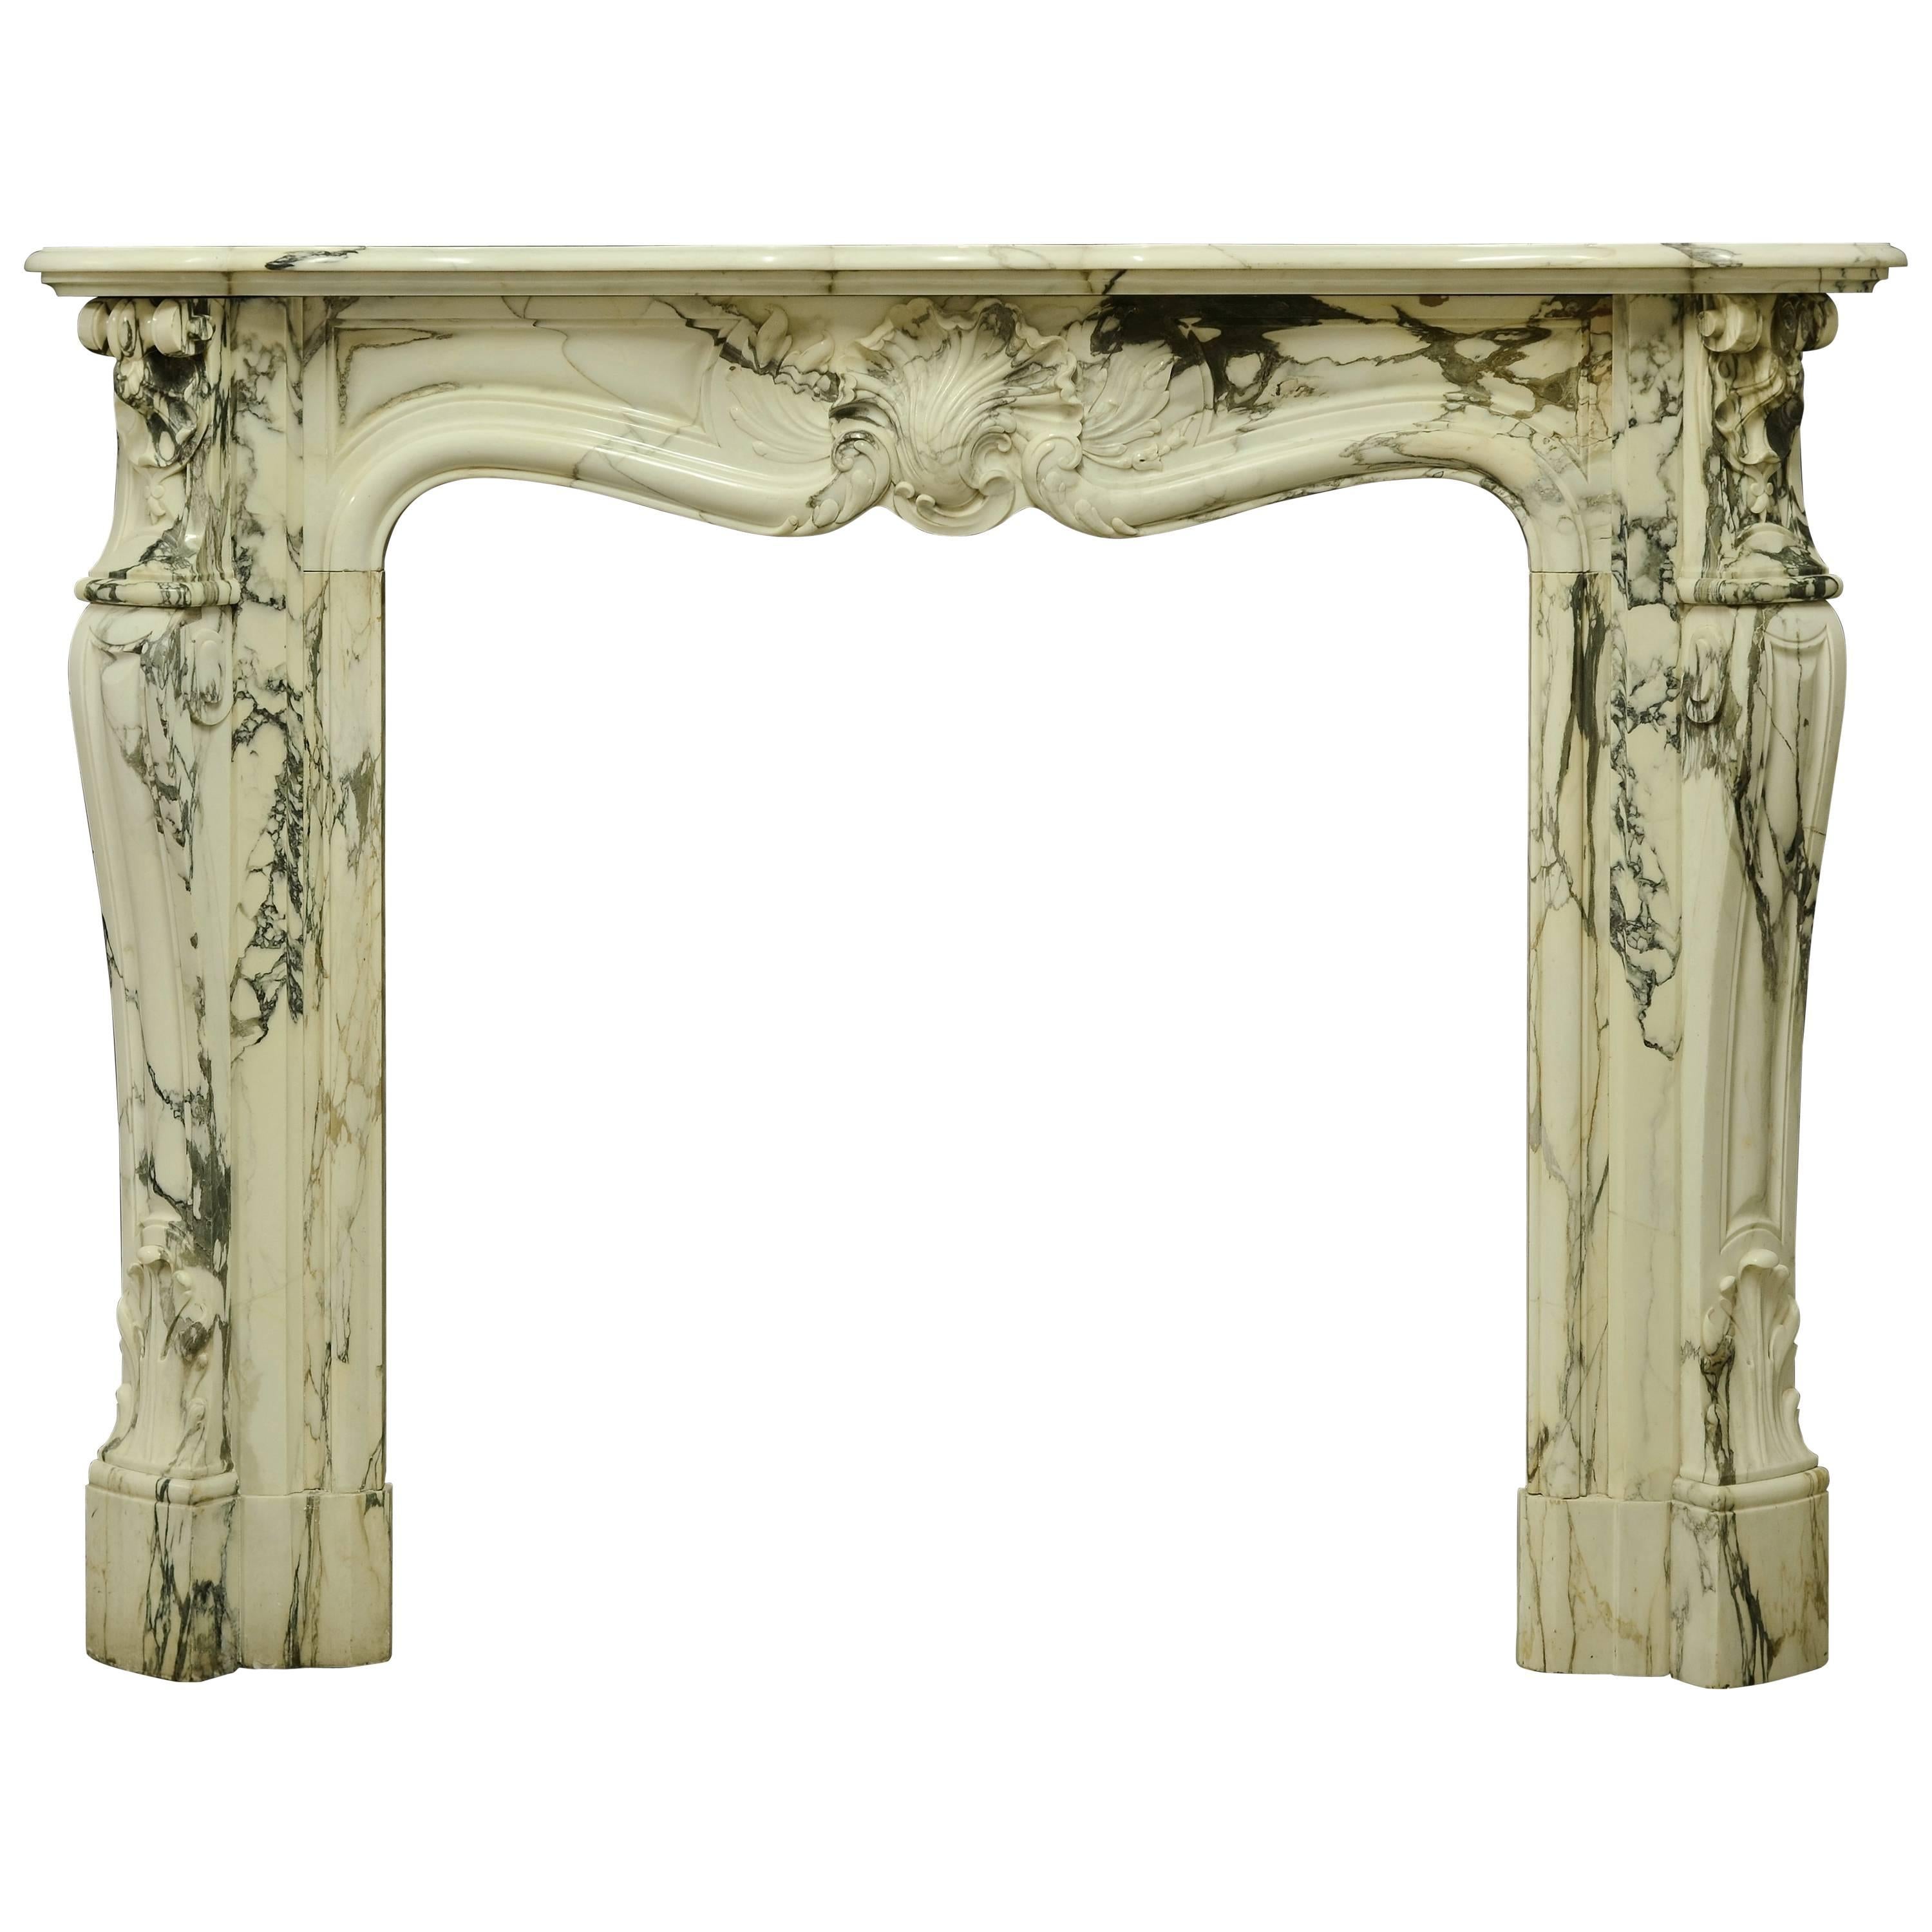 19th Century Marble Louis XV Fireplace Mantel from France